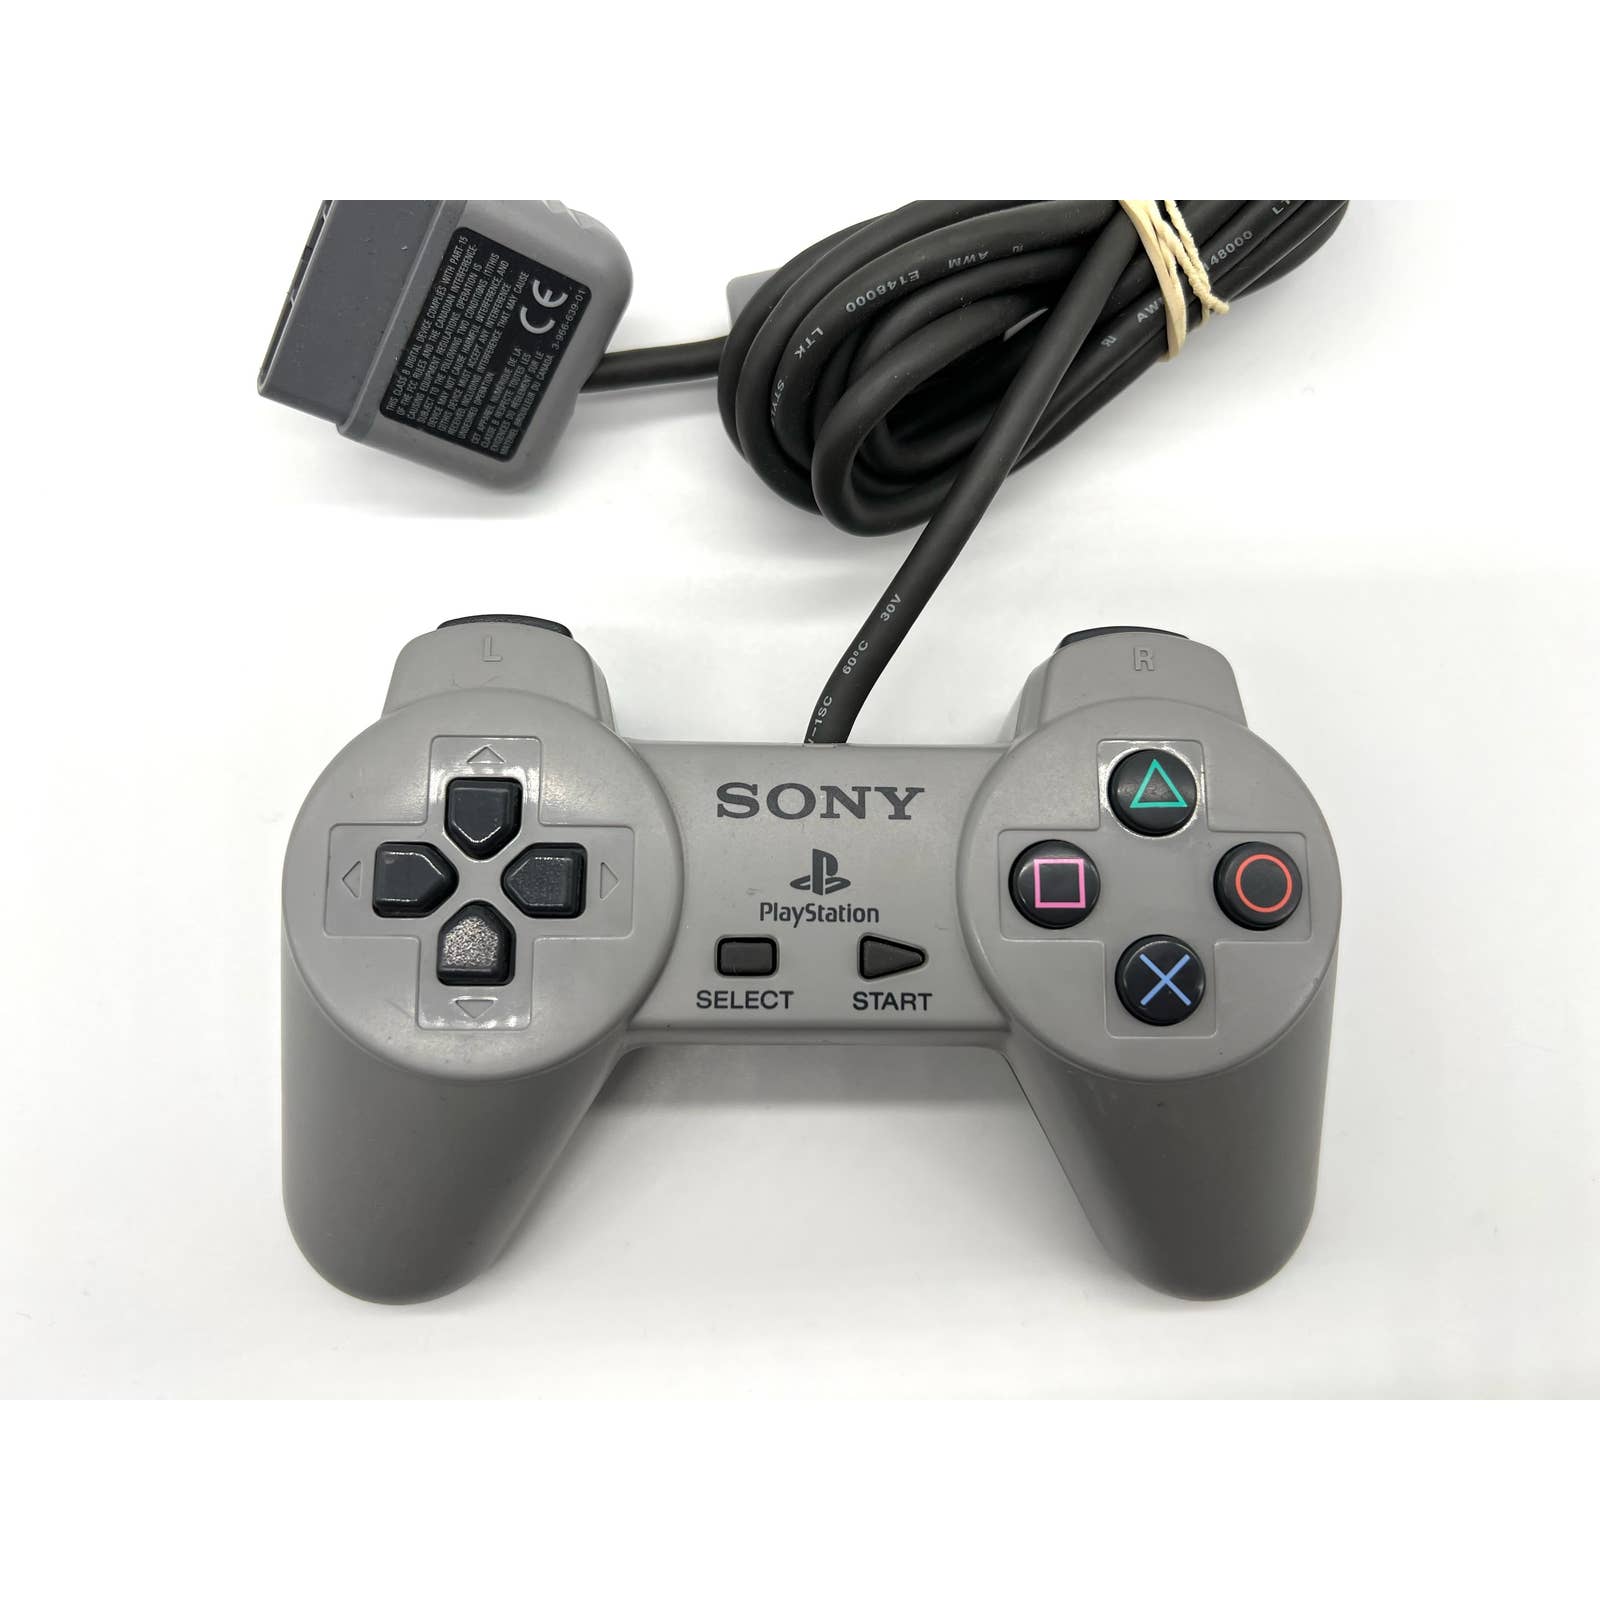 Sony Playstation 1 PS1 Console with Cables & Original Controller